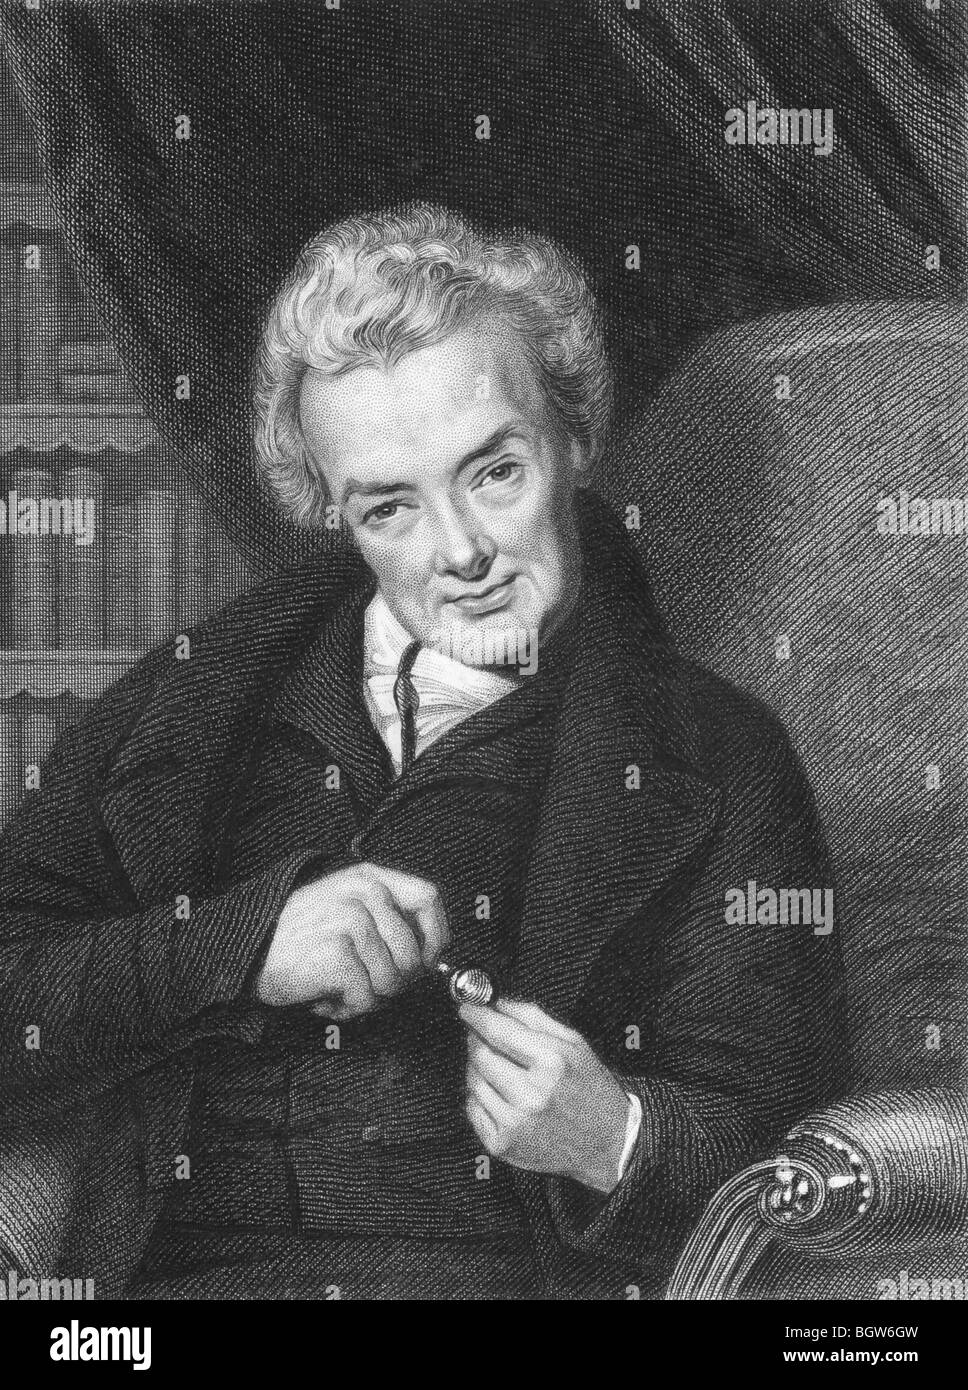 William Wilberforce on engraving from the 1850s. British politician,and leader of the movement to abolish the slavery trade. Stock Photo